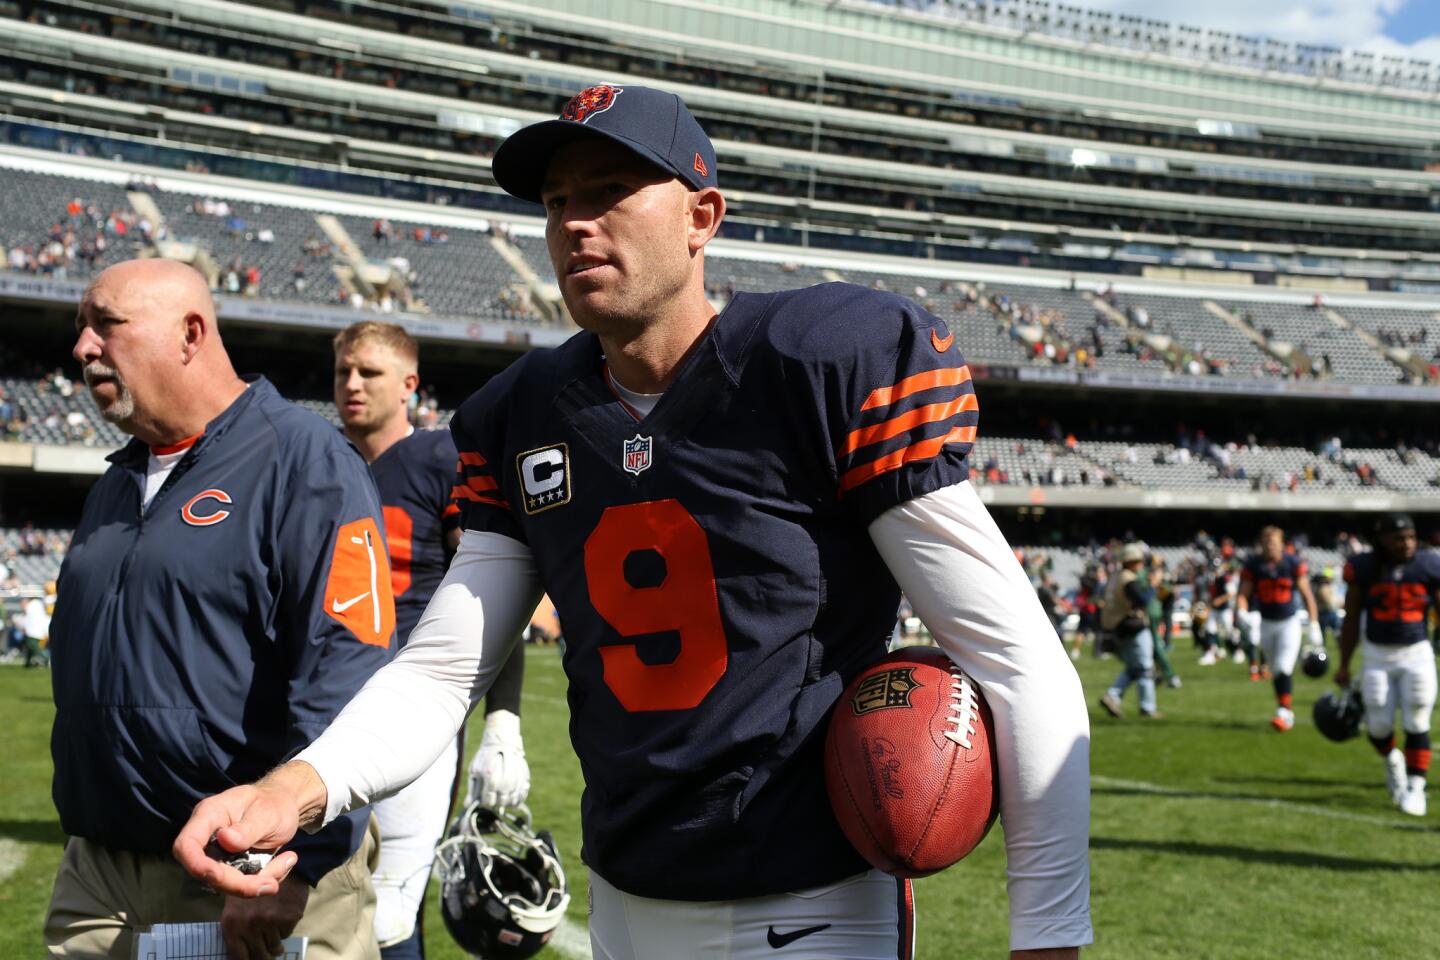 Robbie Gould leaves the field following a game against the Green Bay Packers.